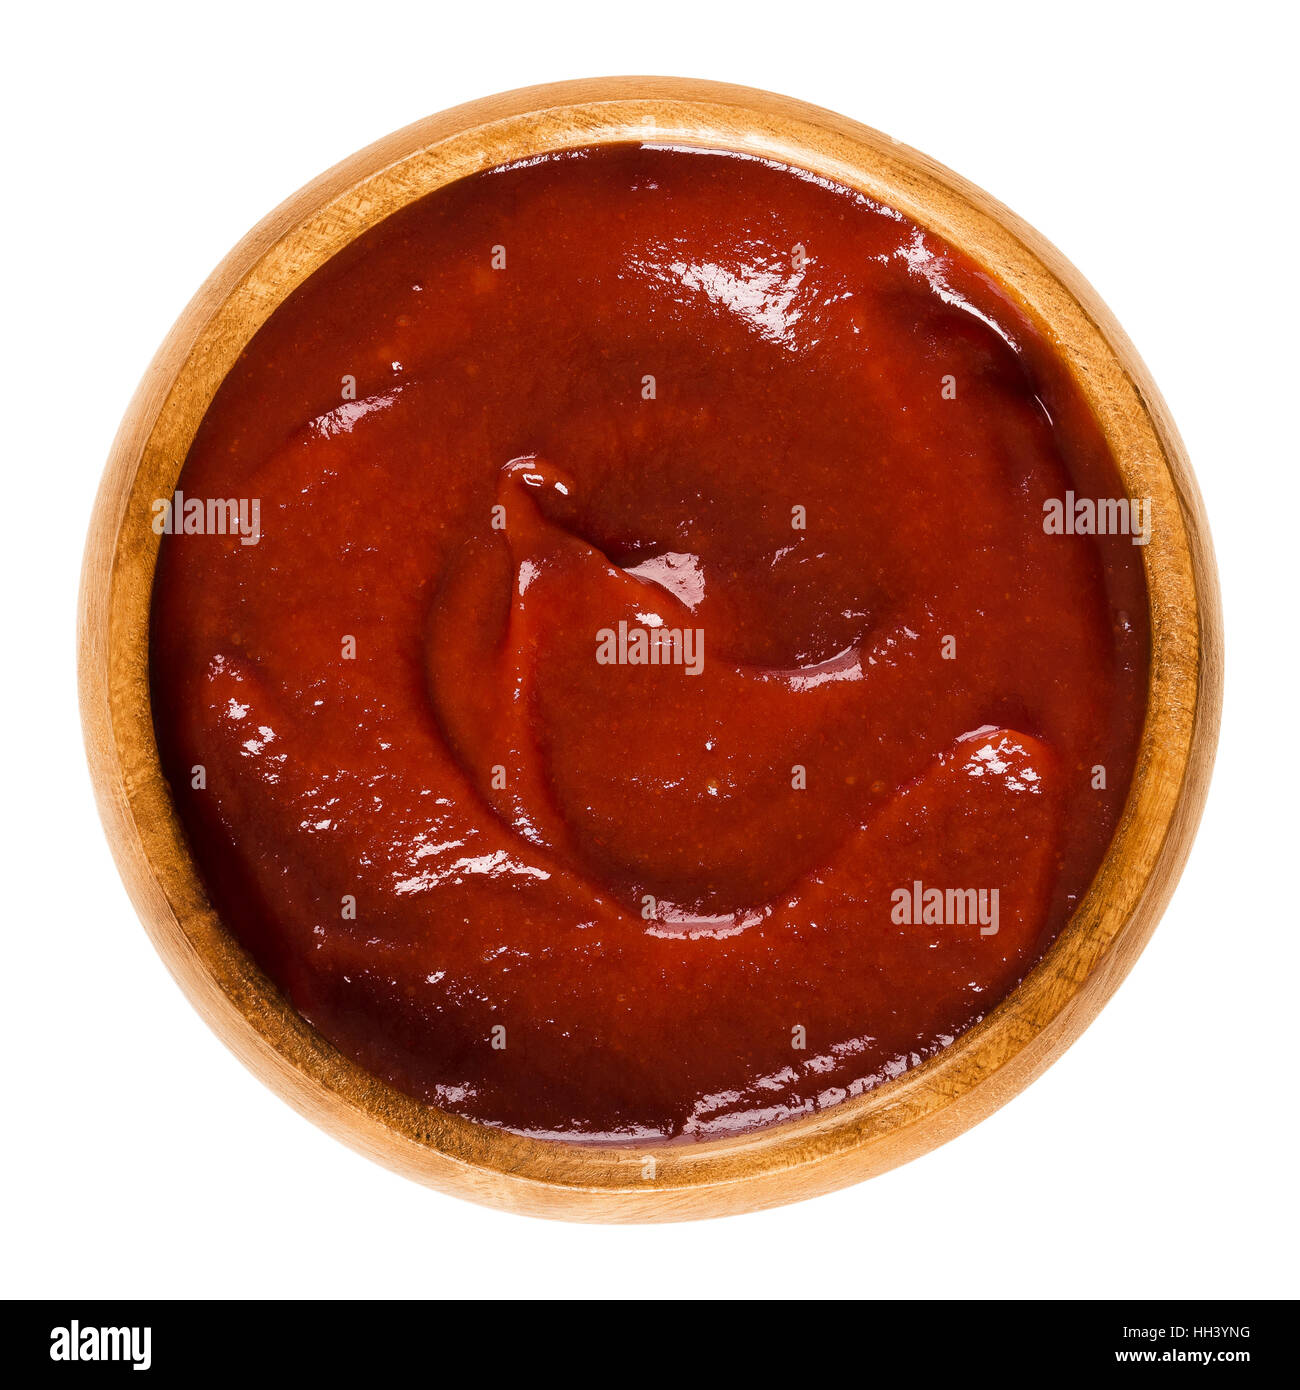 Tomato ketchup in wooden bowl. Also called catsup or ketsup, is a red table sauce made from tomatoes, often used as a condiment. Stock Photo